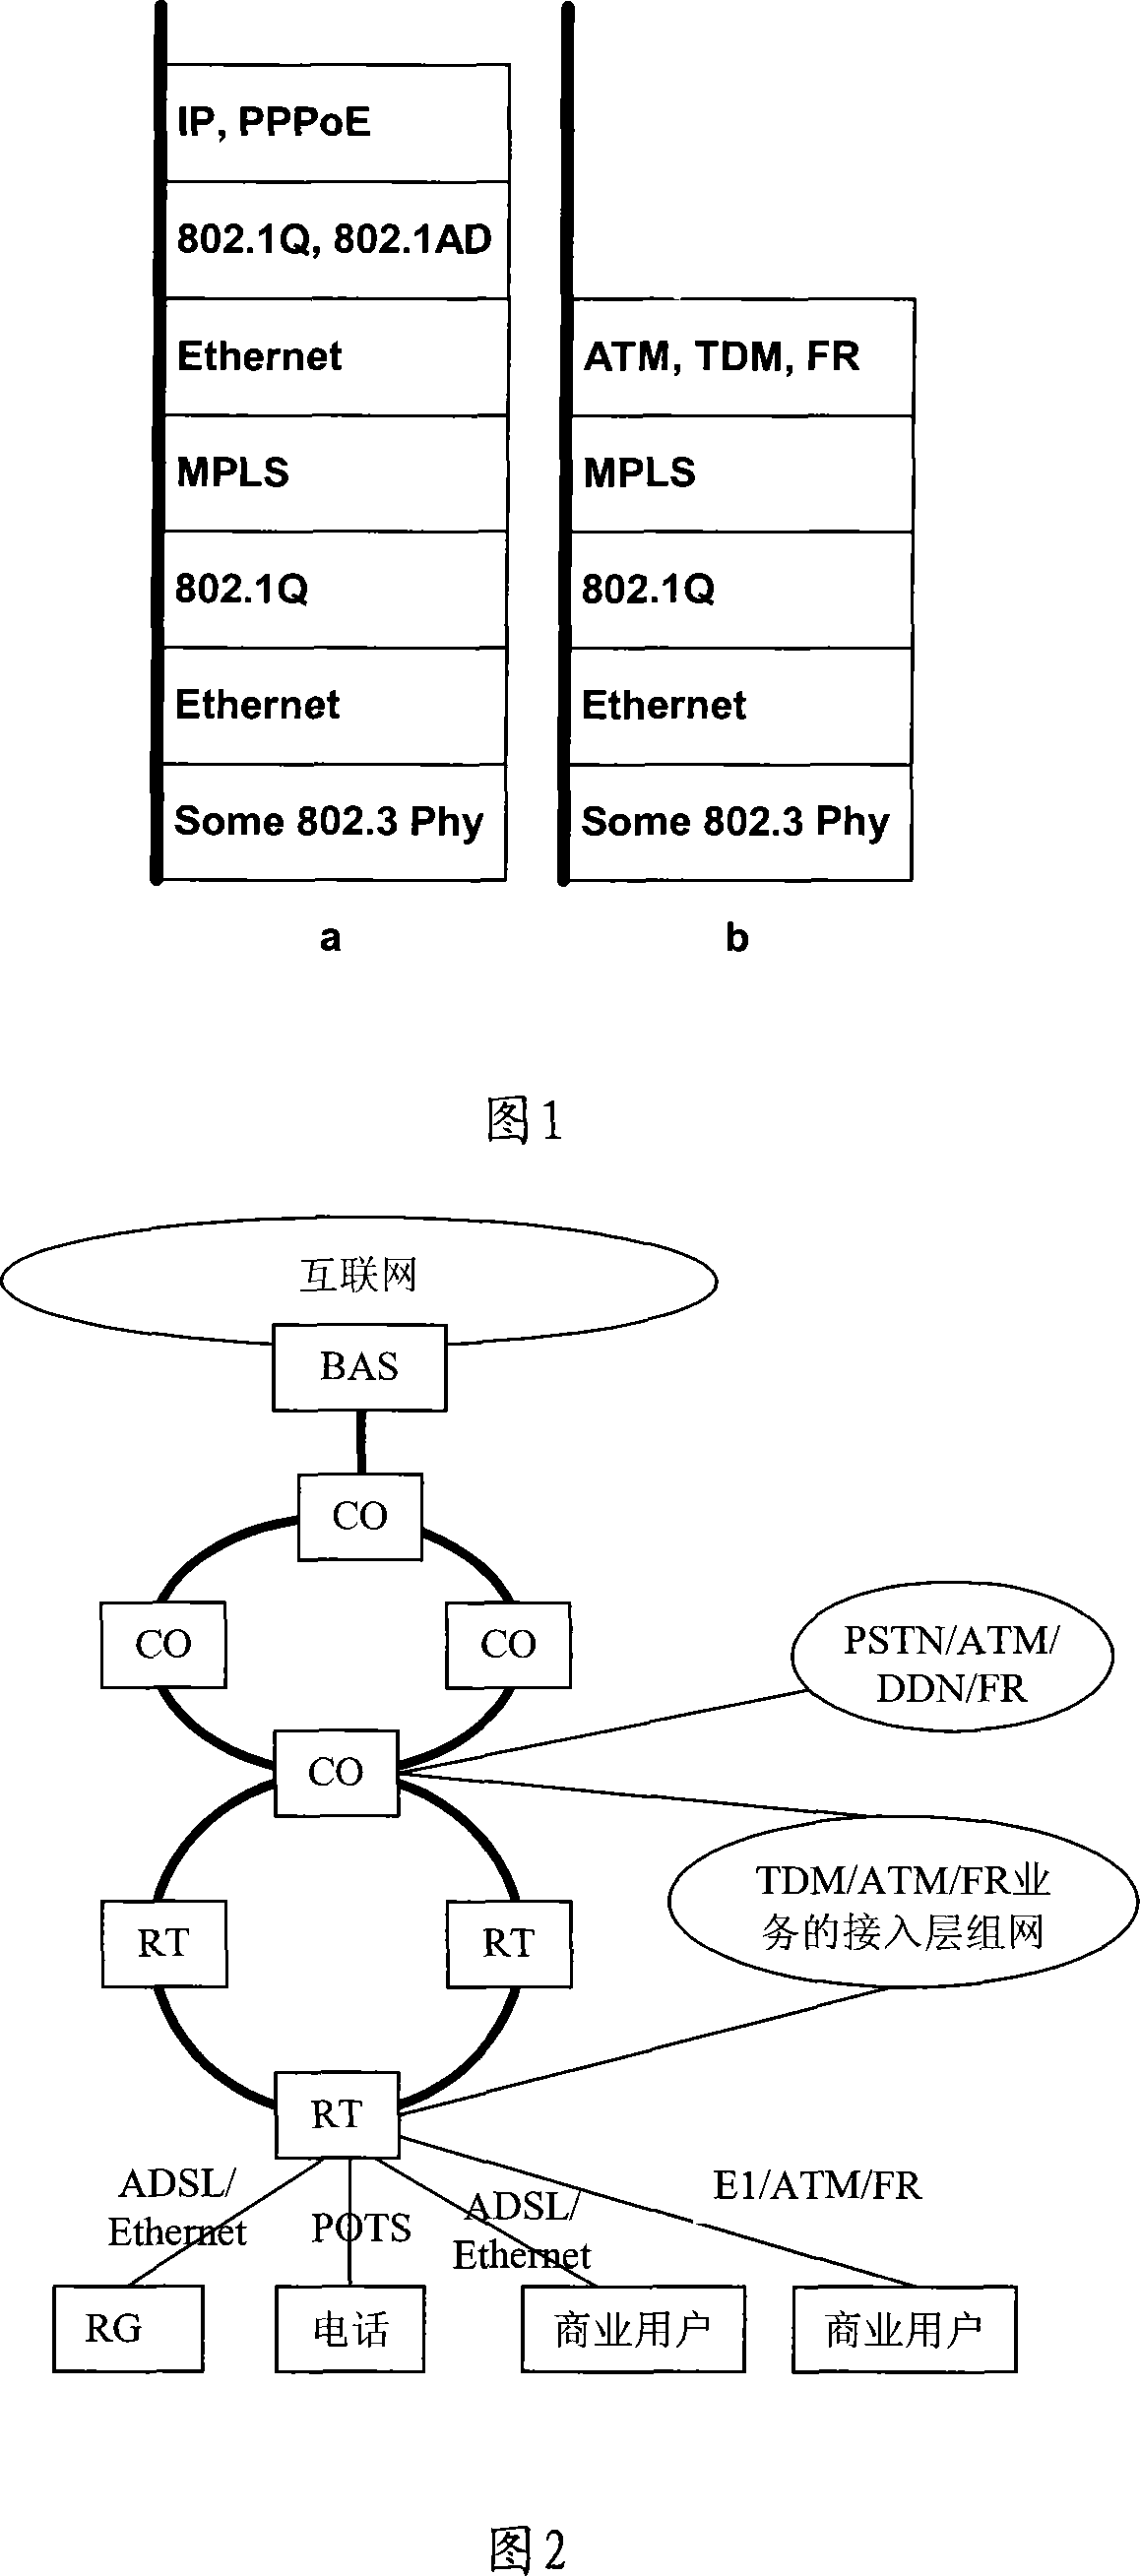 Method for access network to realize synthesis business access